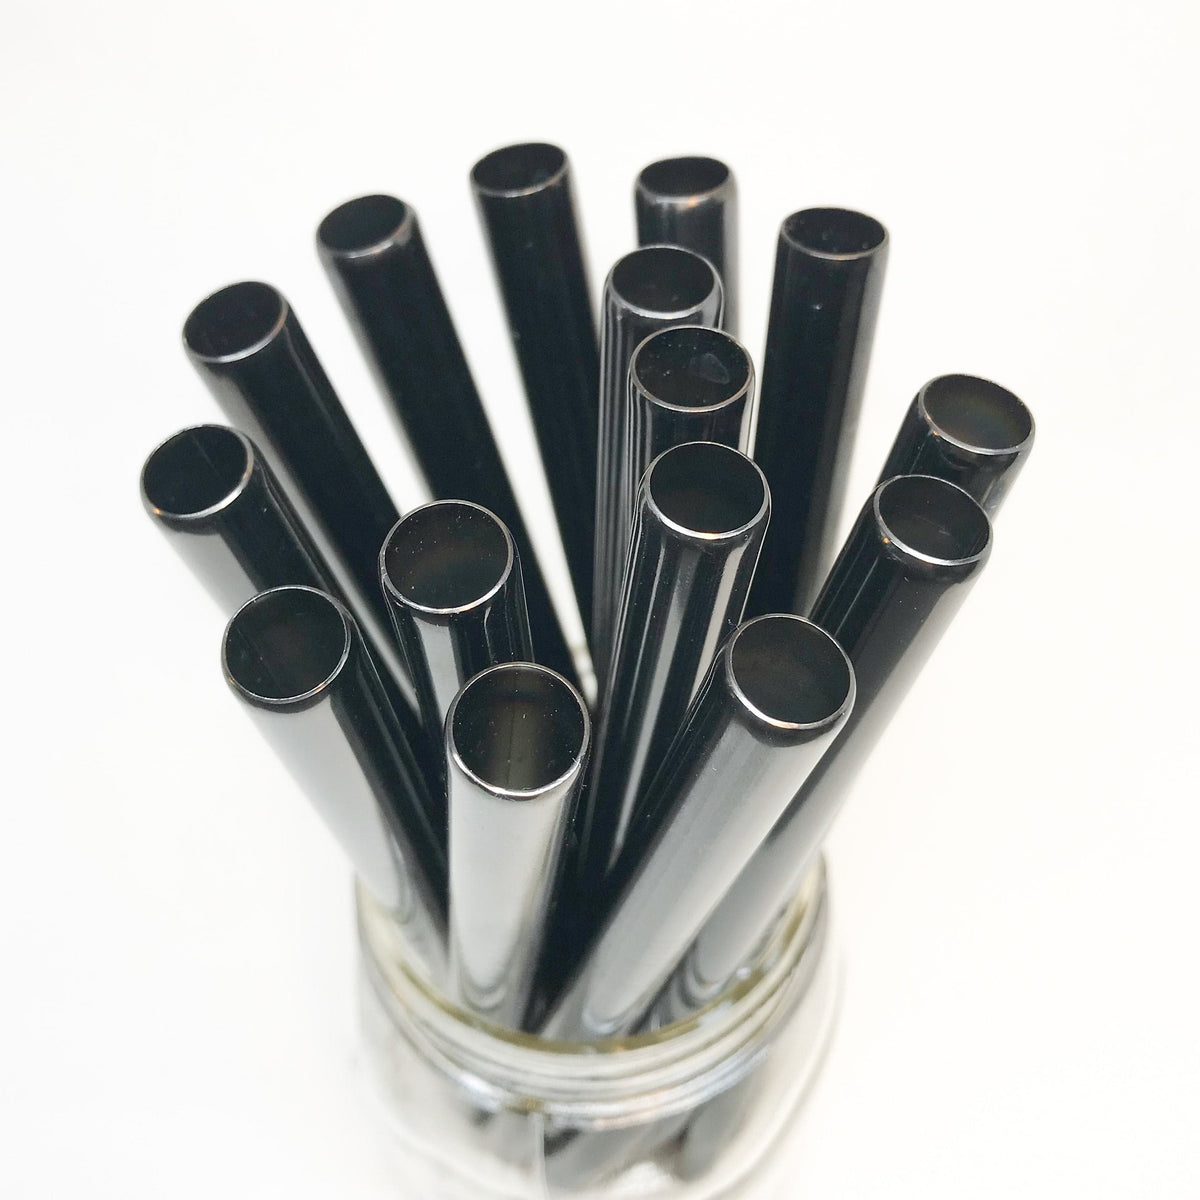 8.5 inch black stainless steel reusable bubble tea straw